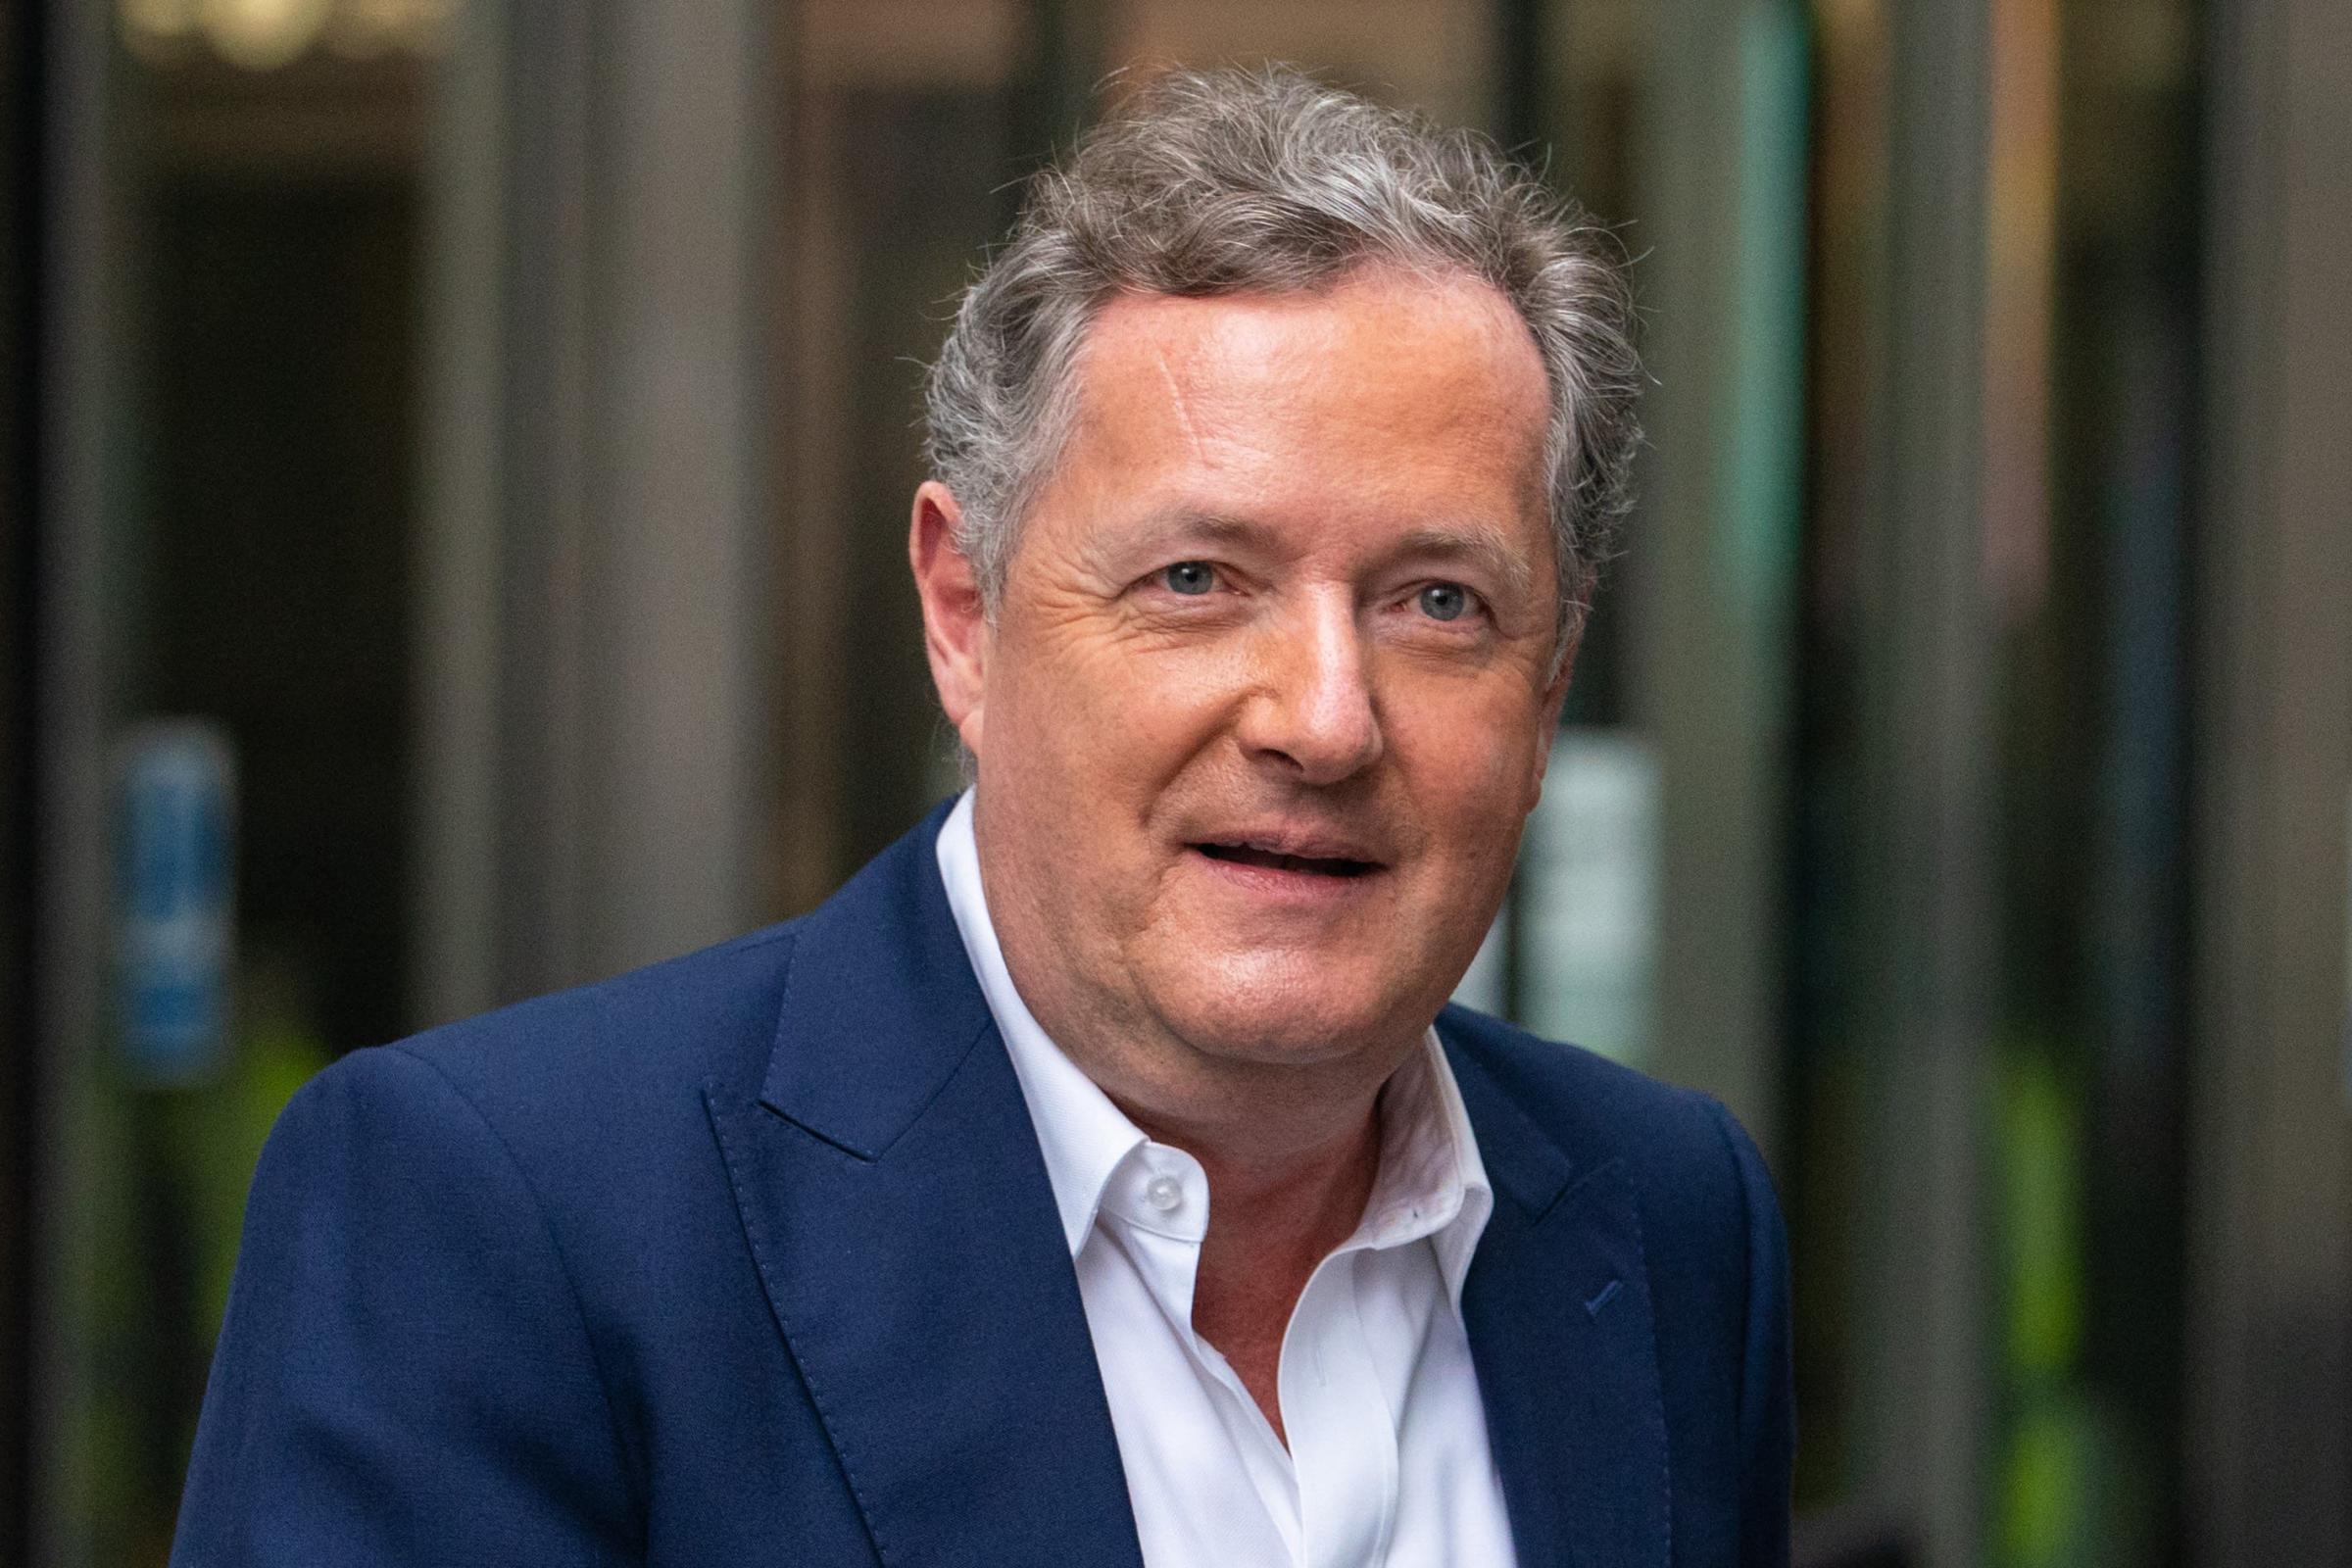 TalkTV launch will feature Piers Morgan’s interview with Donald Trump